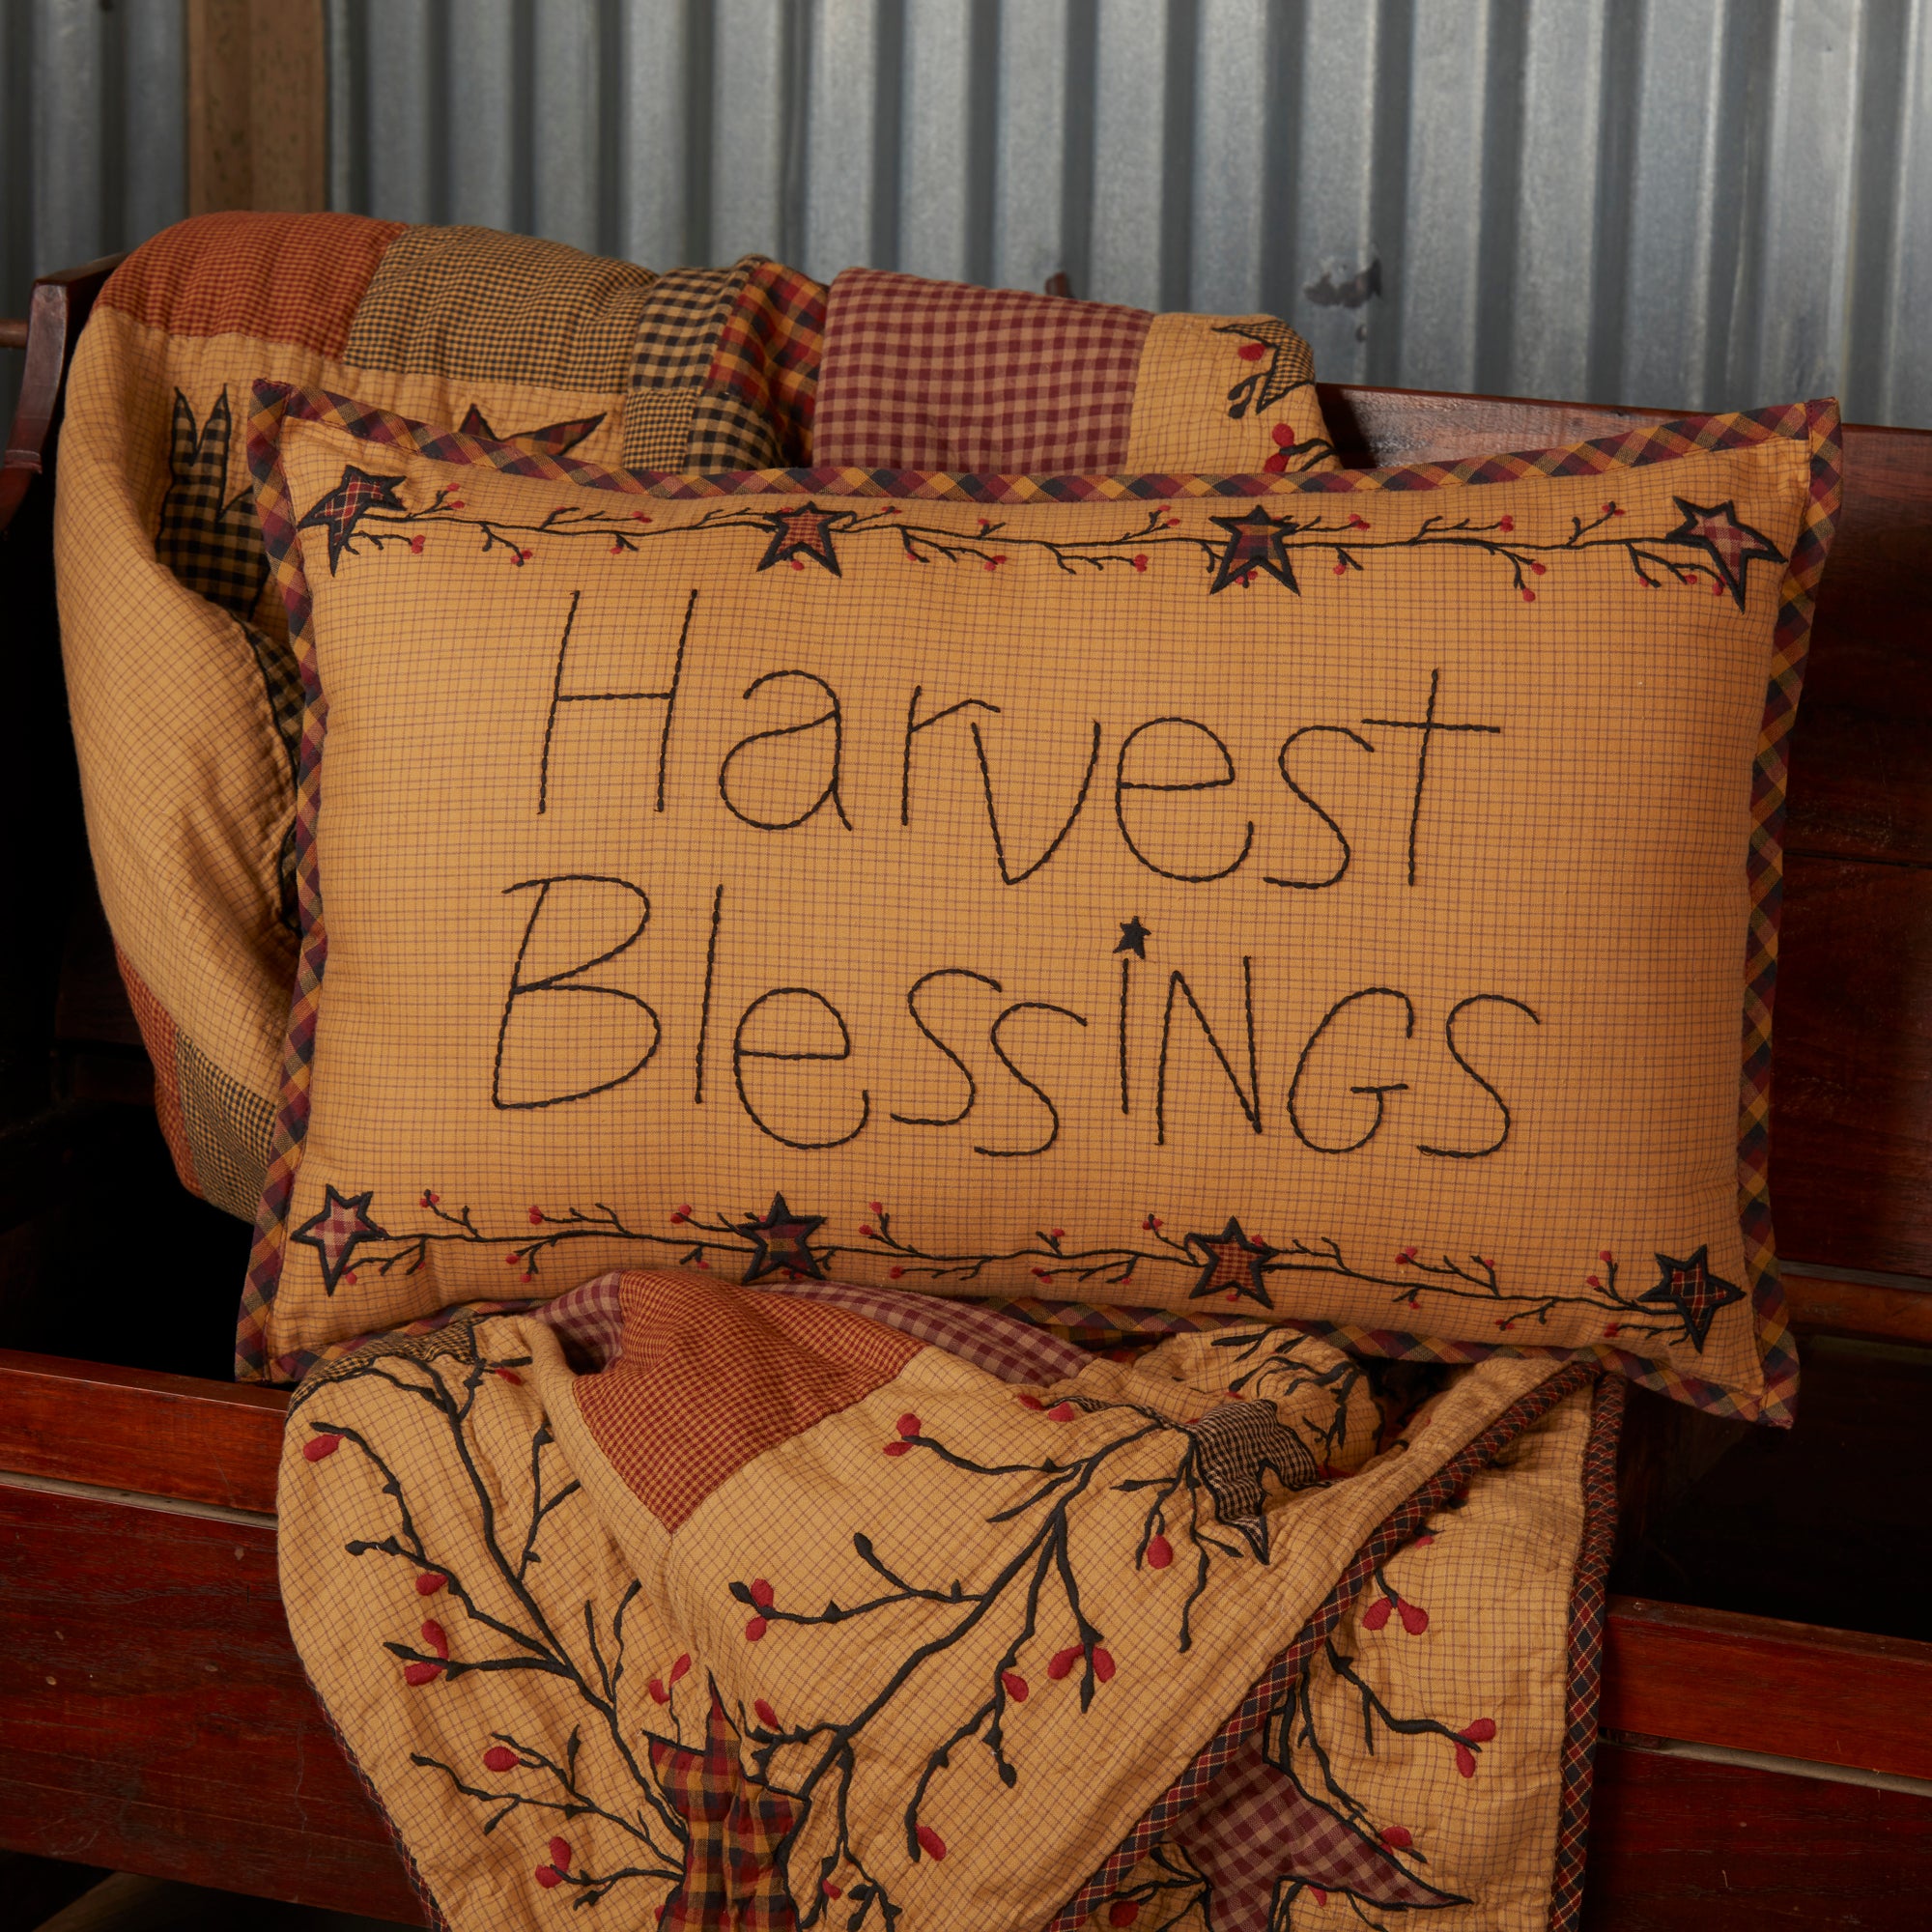 http://vhcbrands.com/cdn/shop/products/56708-Heritage-Farms-Harvest-Blessings-Pillow-14x22-detailed-image-1.jpg?v=1670976966